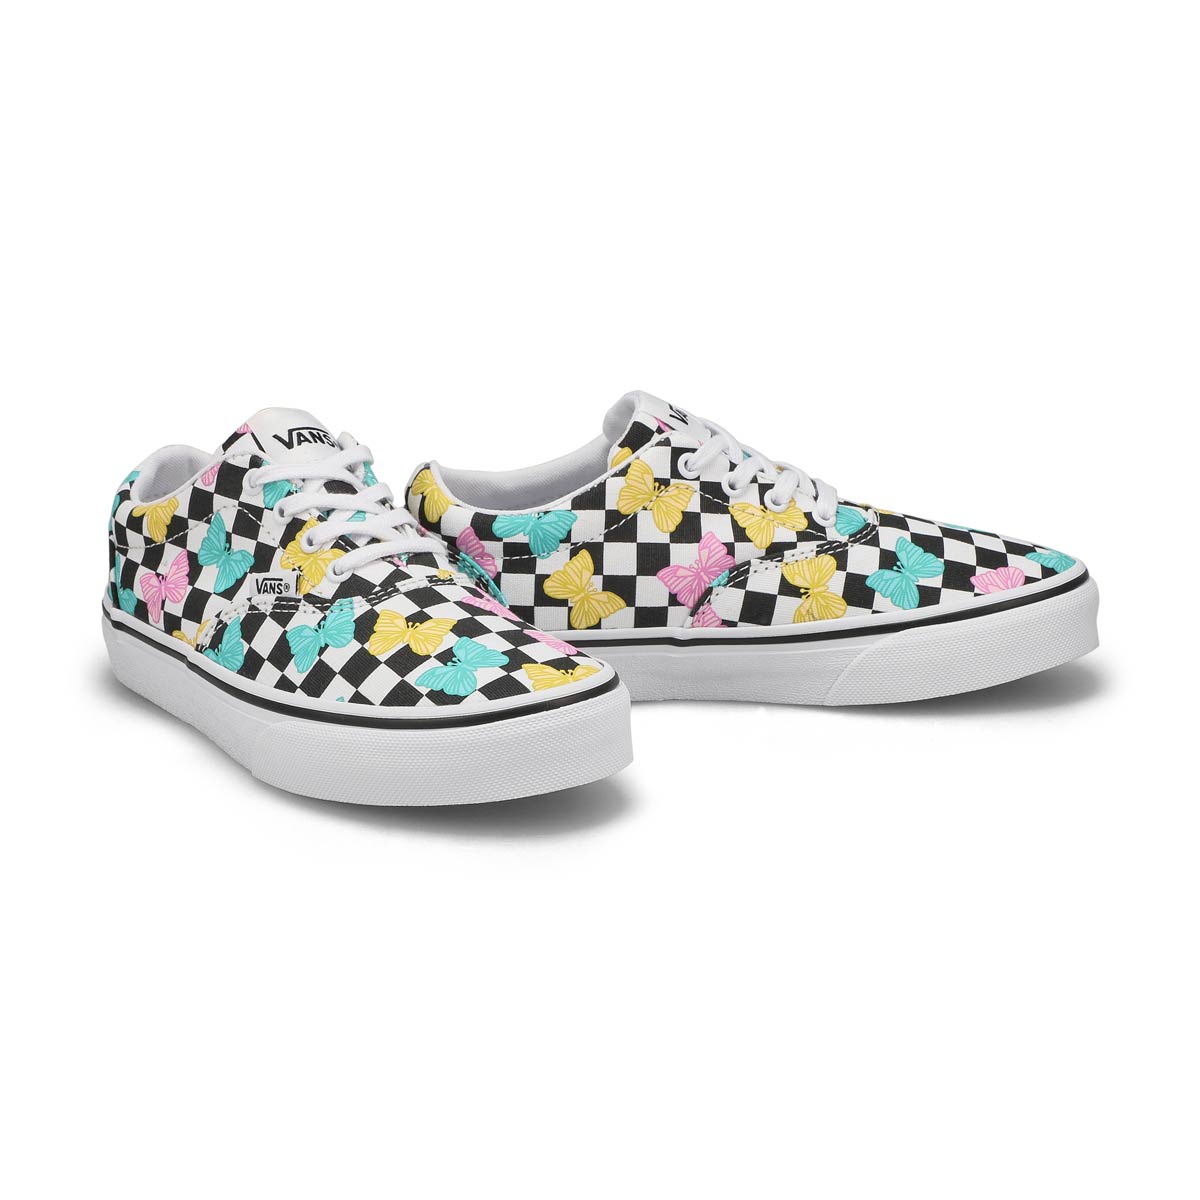 Vans Girls' Doheny Butterfly Checkerboard Sne | SoftMoc.com